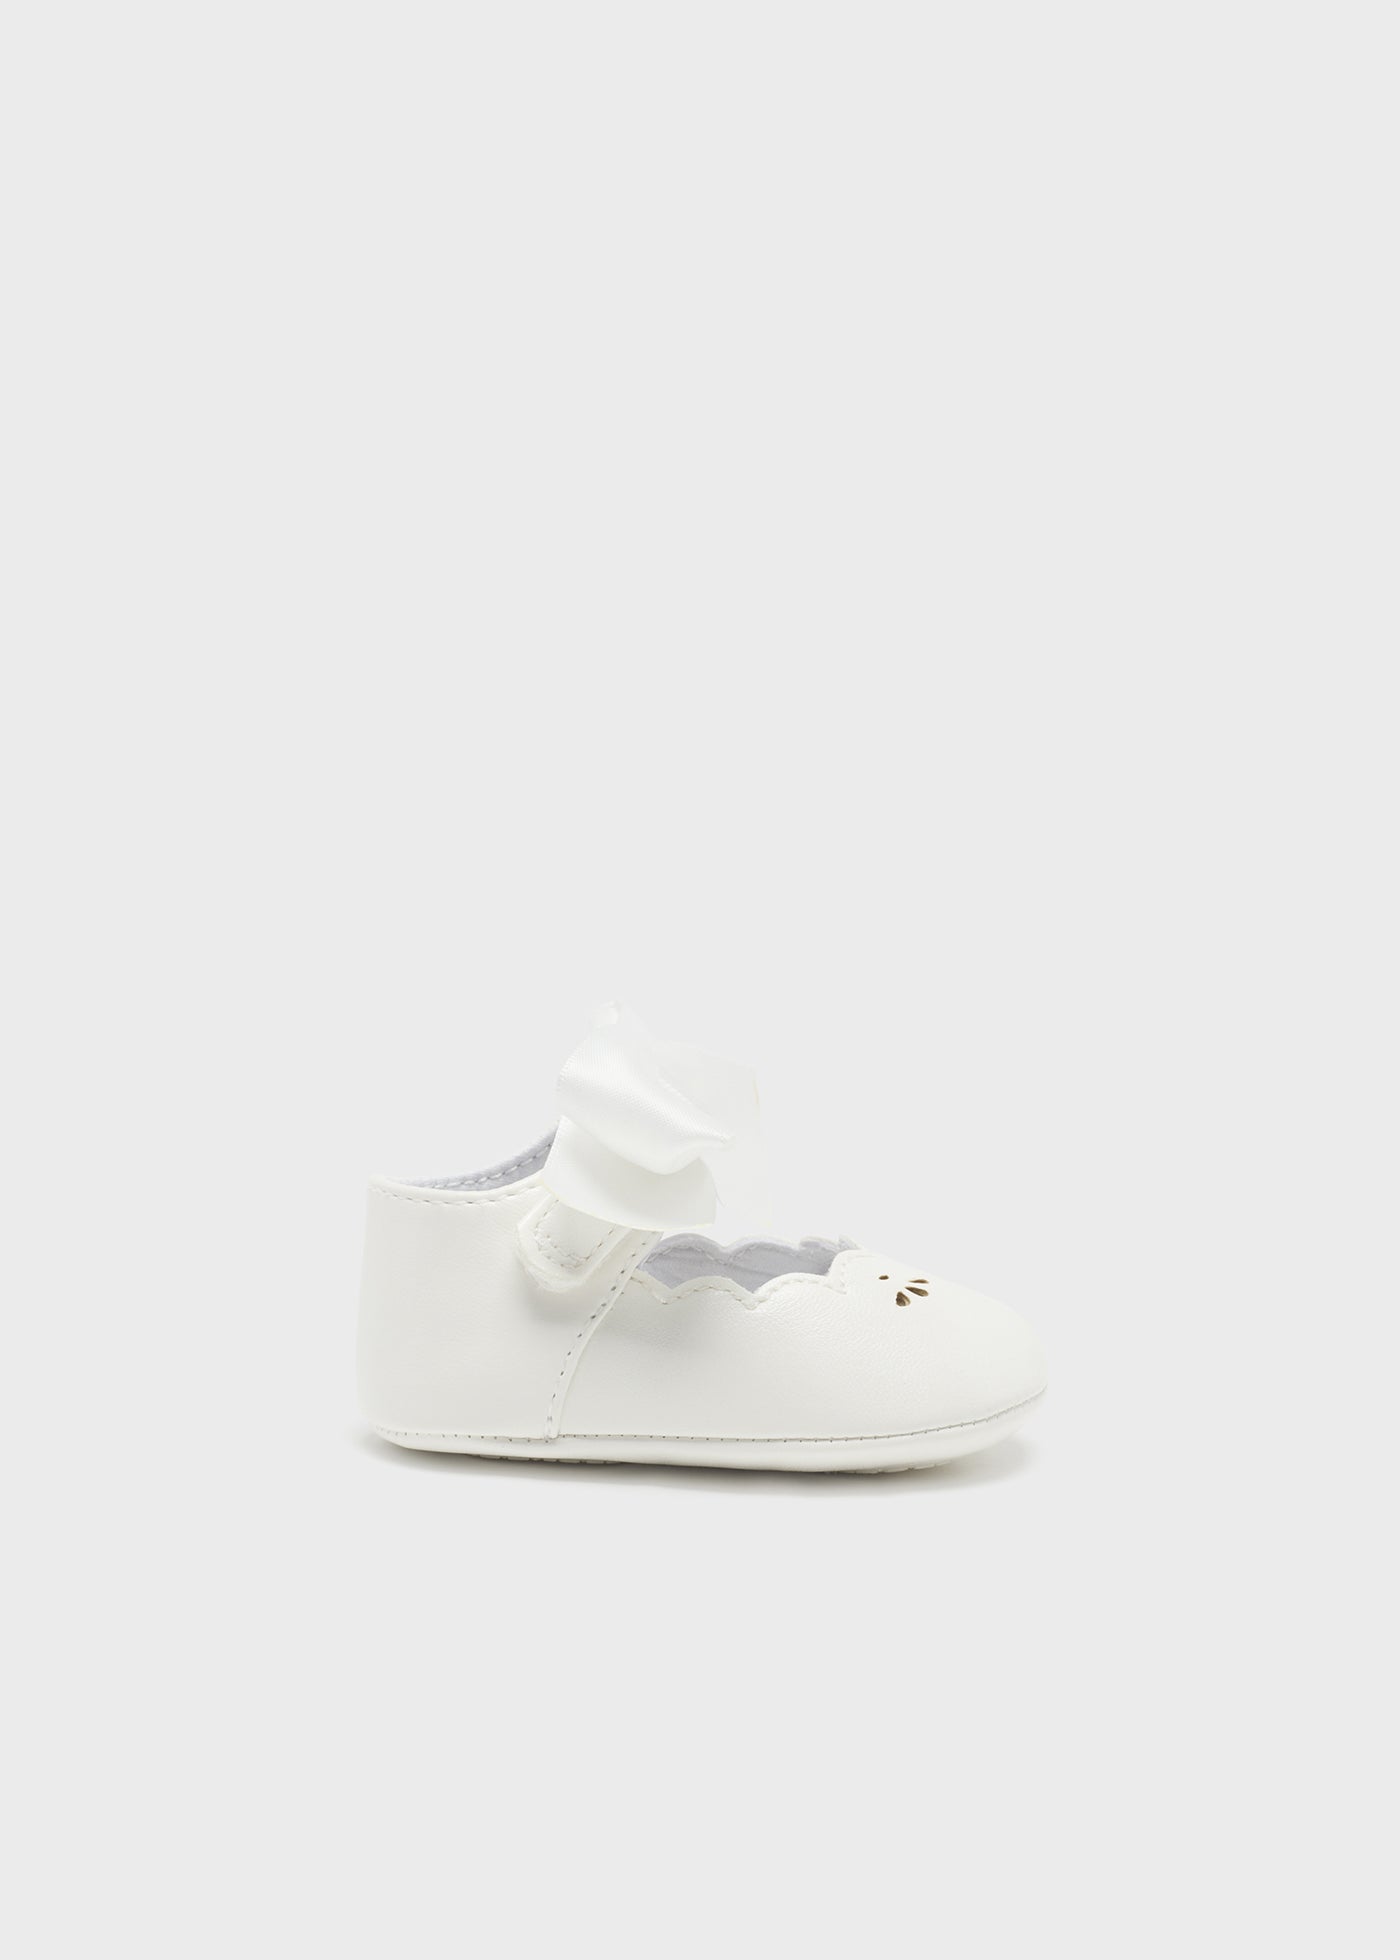 Mayoral Baby Bow Buckle Formal Shoes White_9631-51